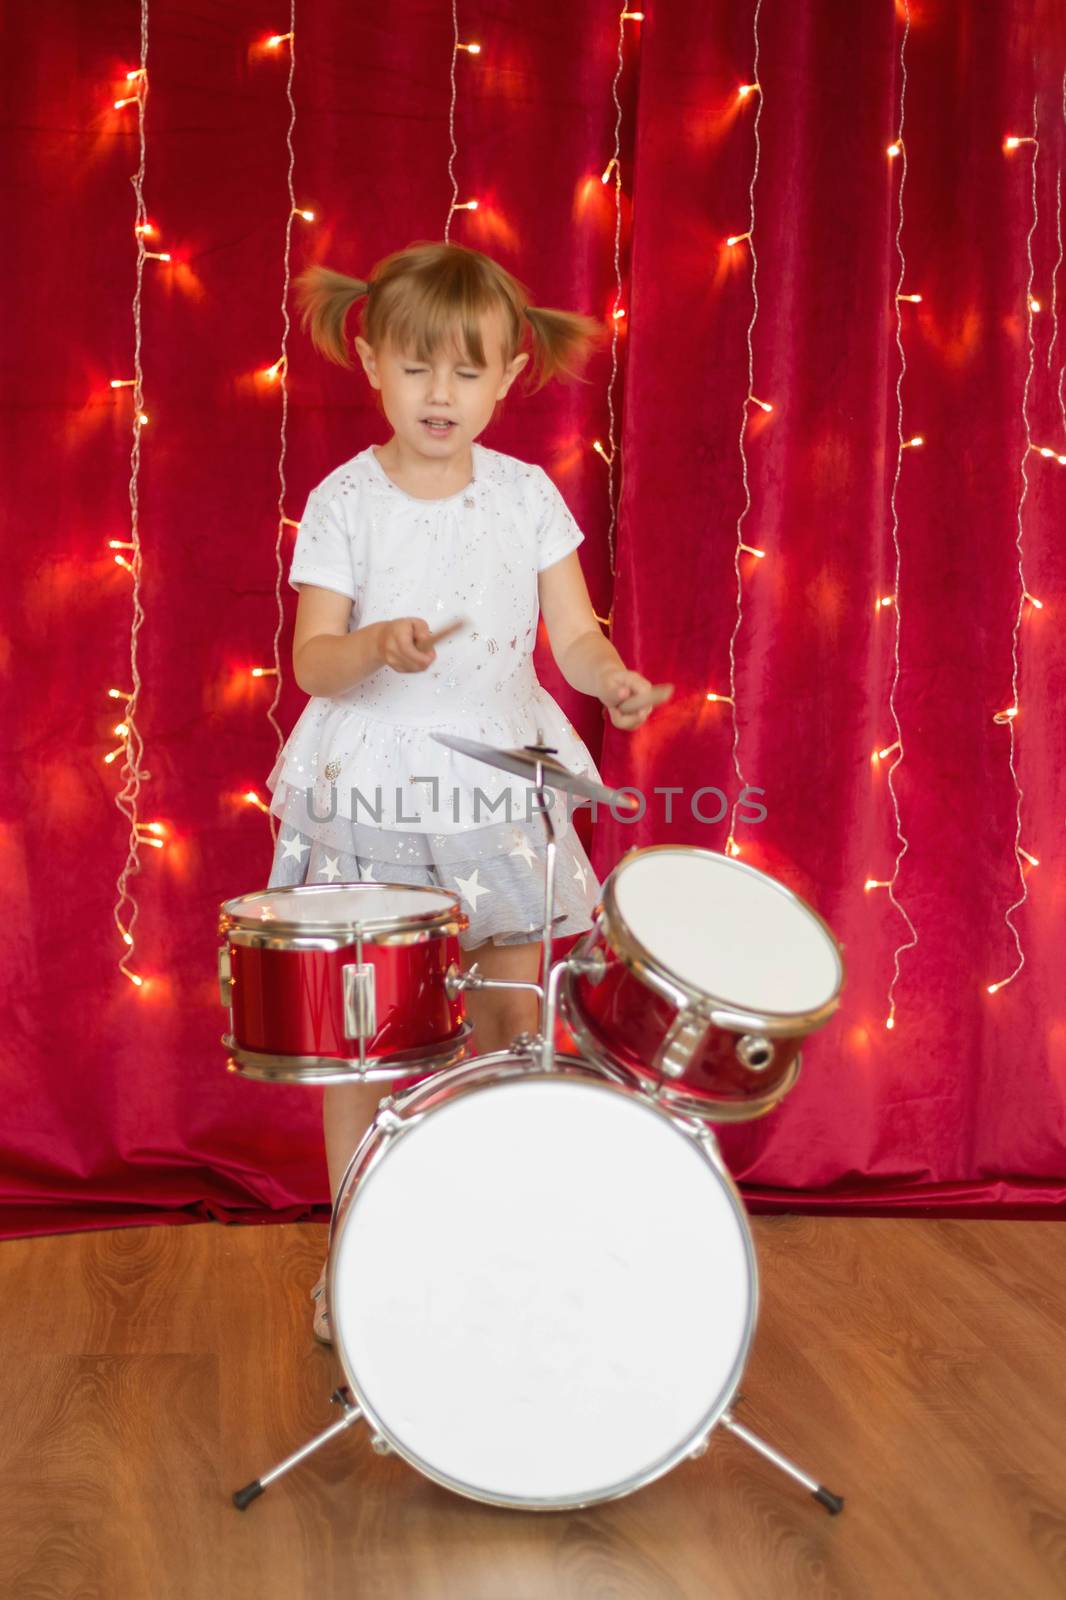 Little smiling girl plays on drums on red background with new year garlands by galinasharapova